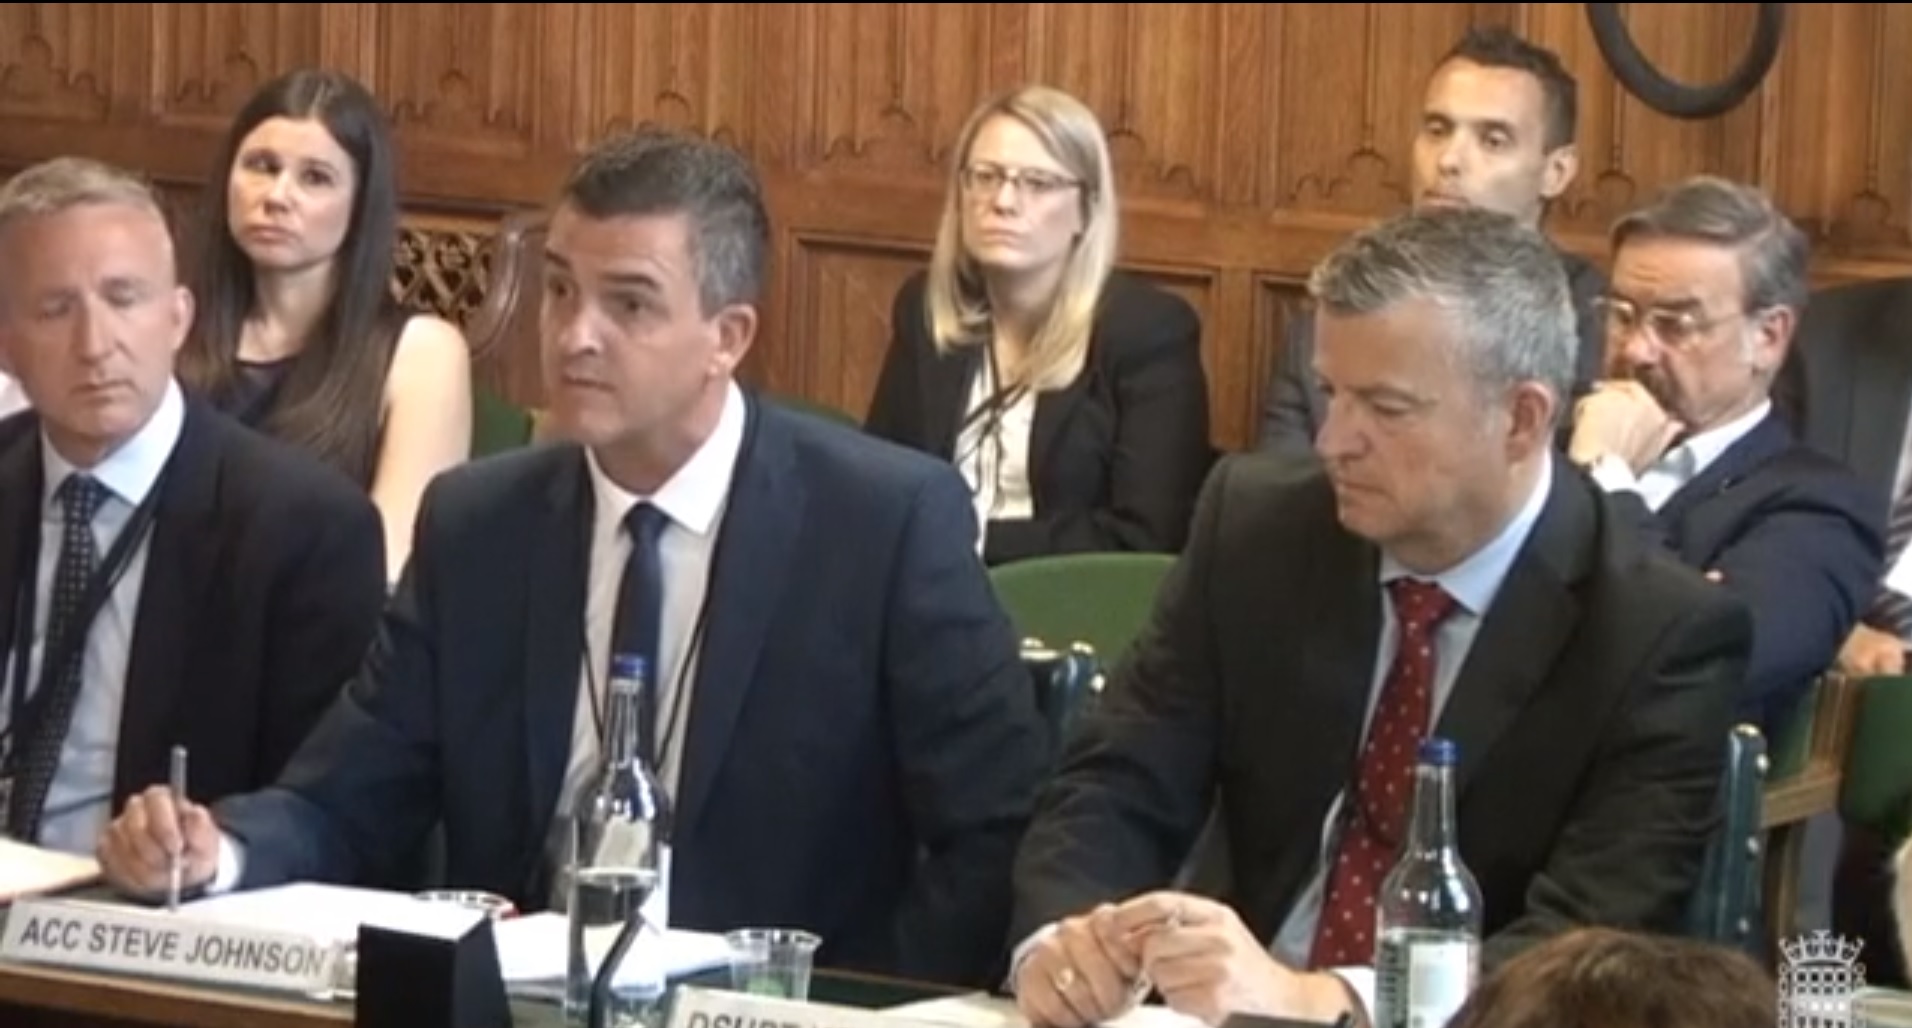 Assistant Chief Constable Steve Johnson (centre) giving evidence to the Scottish Affairs Committee